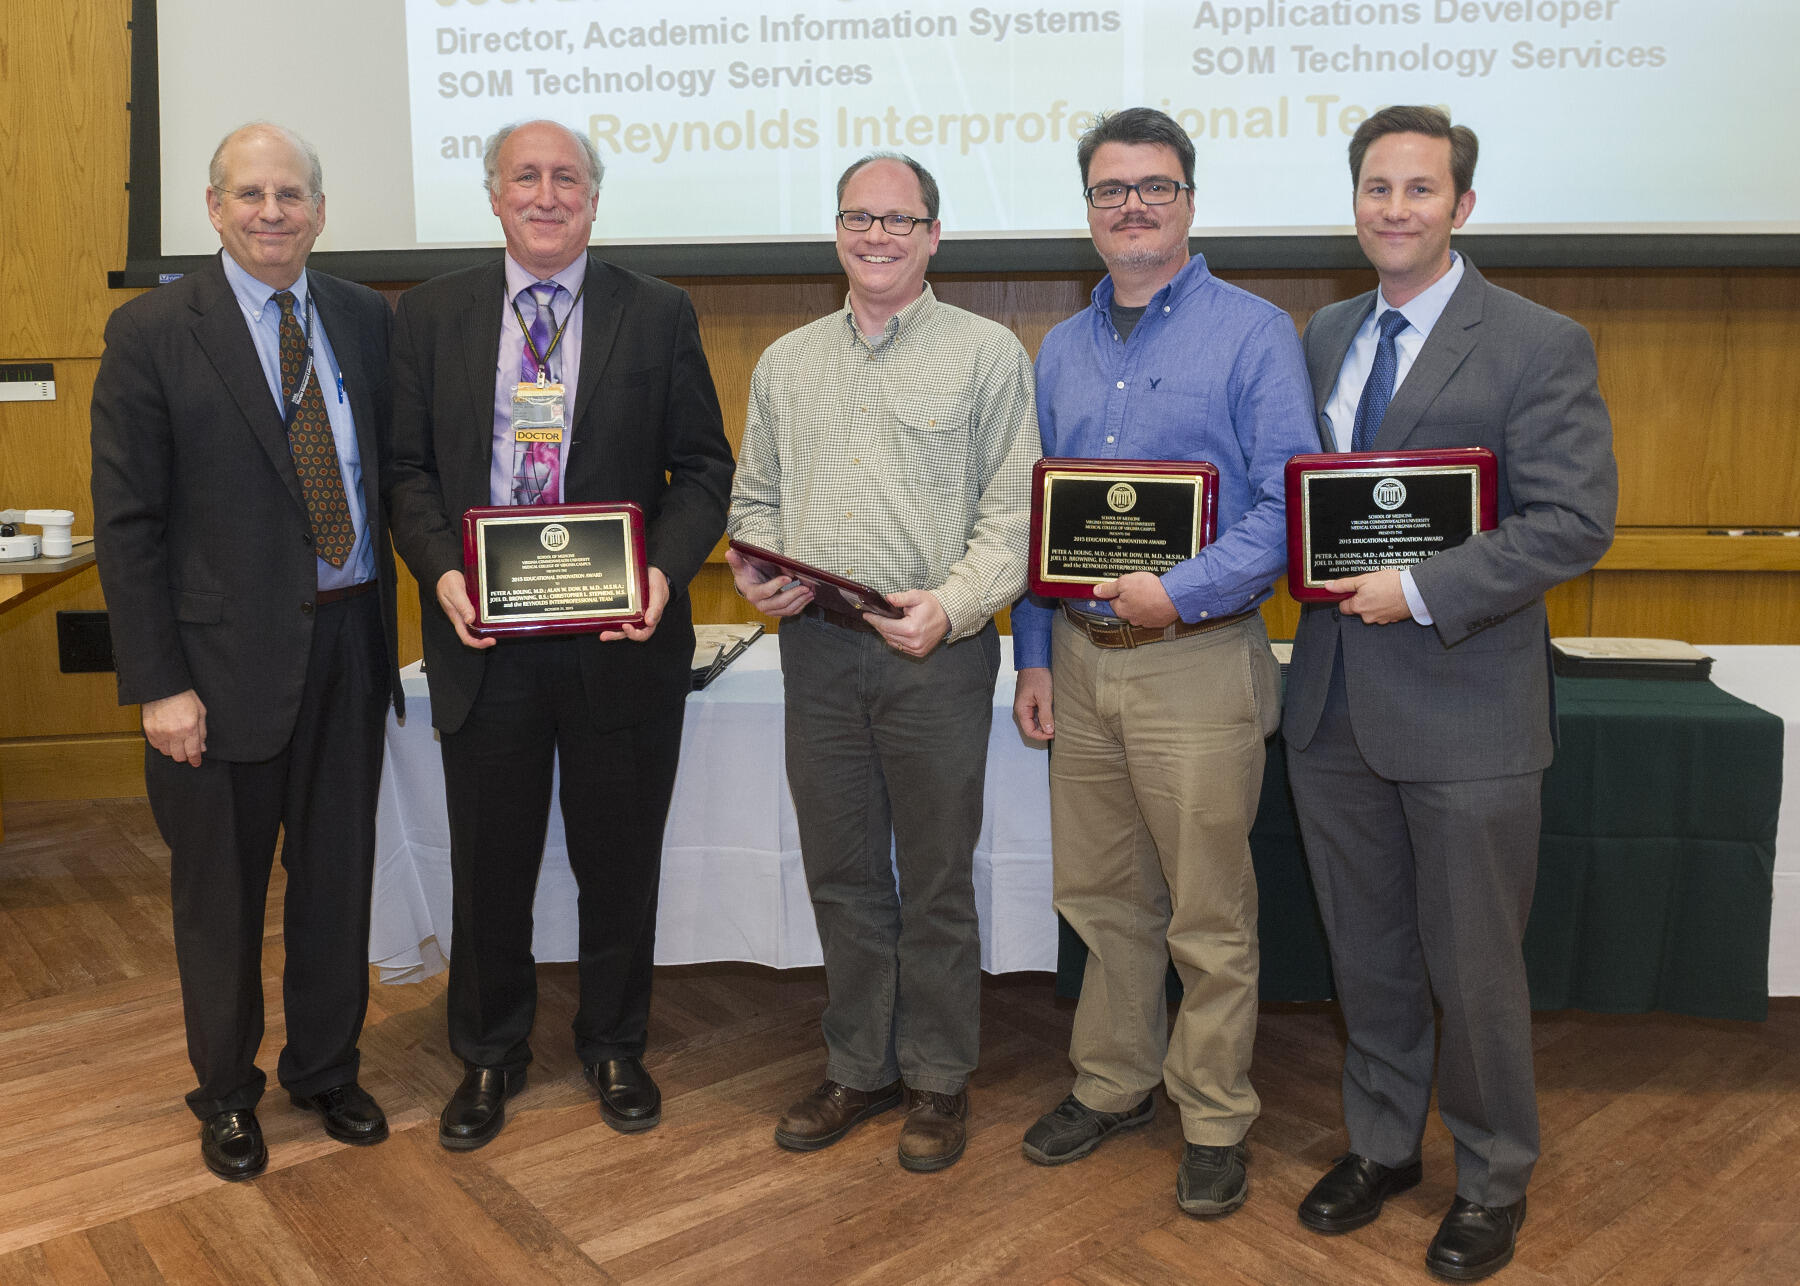 The Educational Innovation Award was present to the Reynolds Interprofessional Team, which includes Peter A. Boling, M.D.; Alan W. Dow III, M.D.; Joel D. Browning; and Christopher L. Stephens.